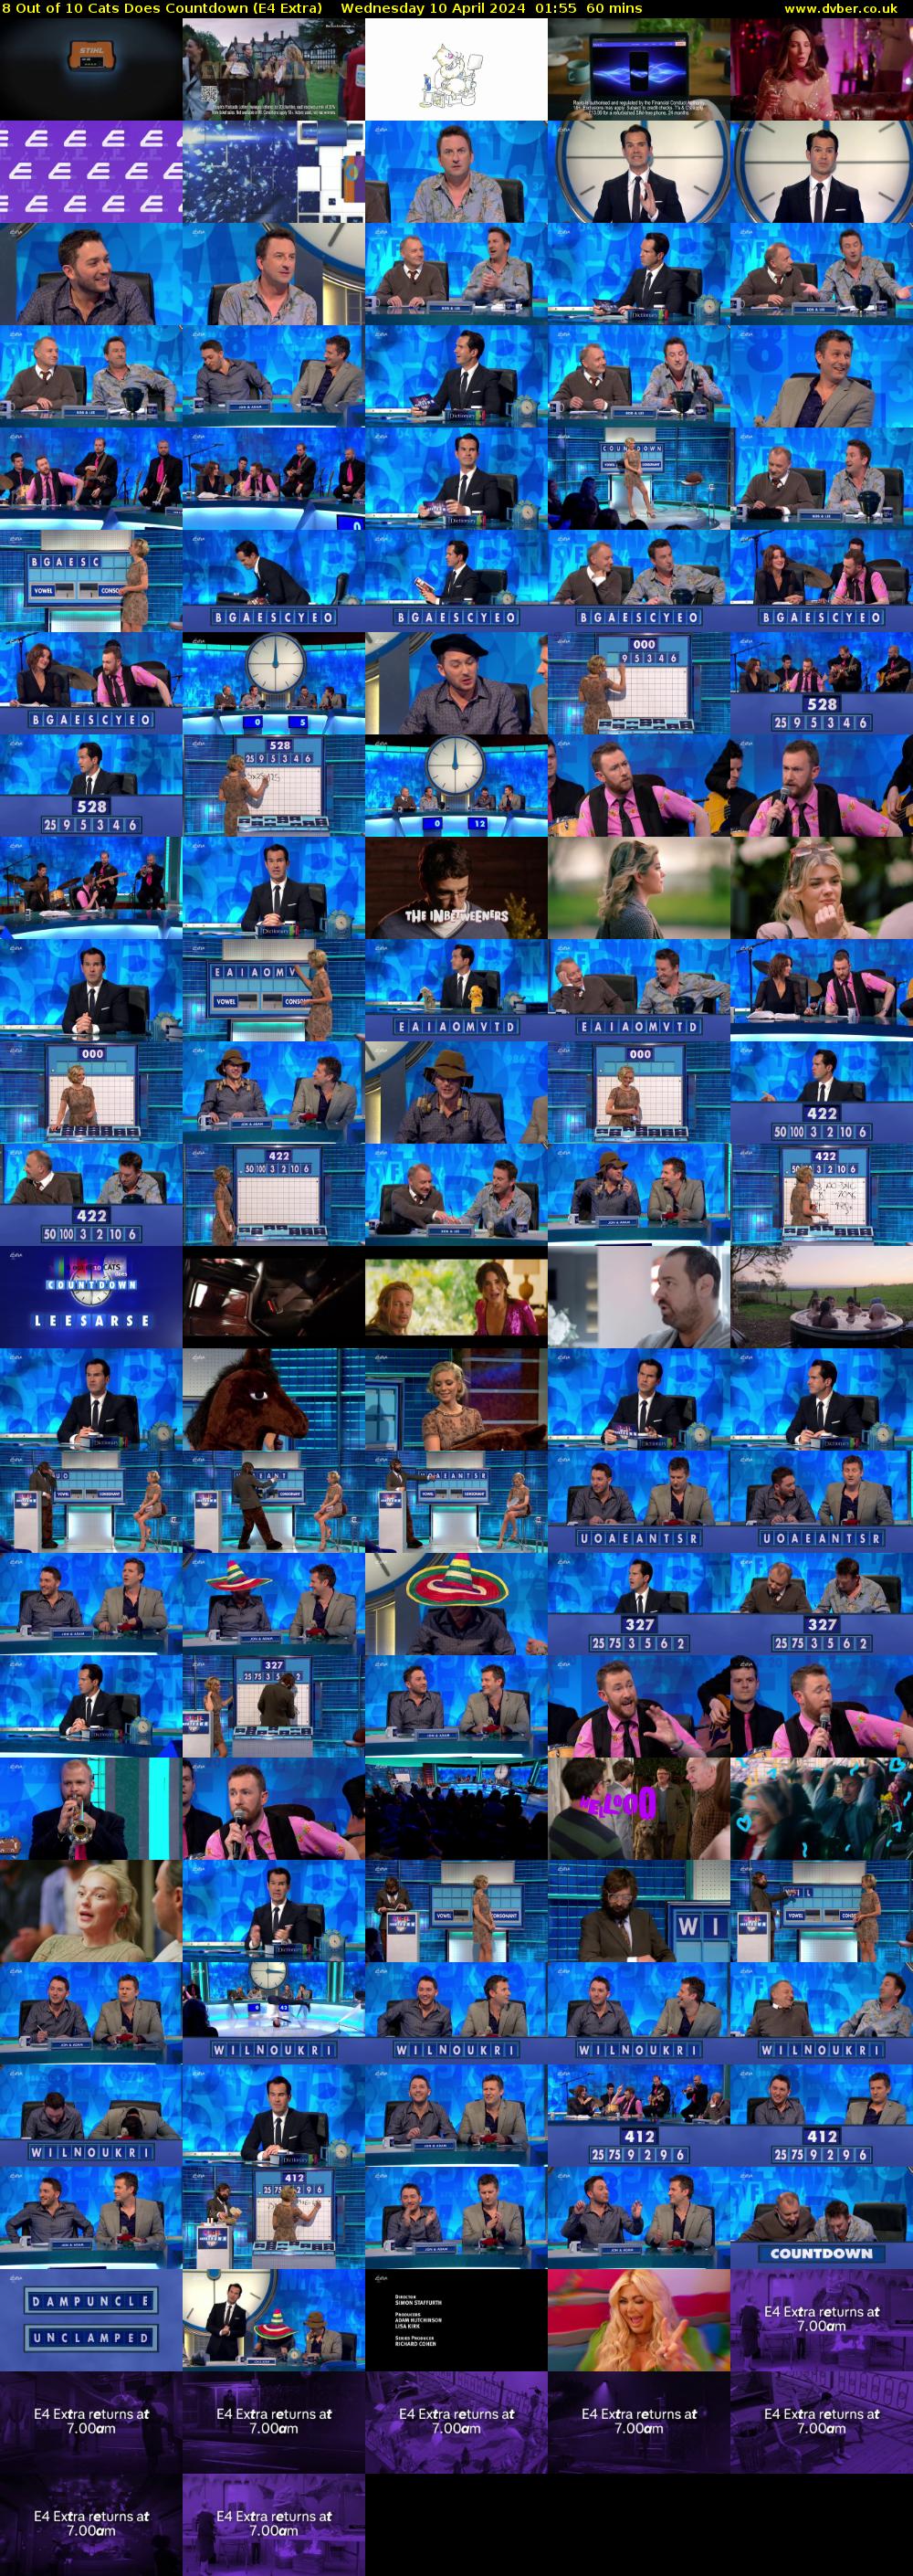 8 Out of 10 Cats Does Countdown (E4 Extra) Wednesday 10 April 2024 01:55 - 02:55